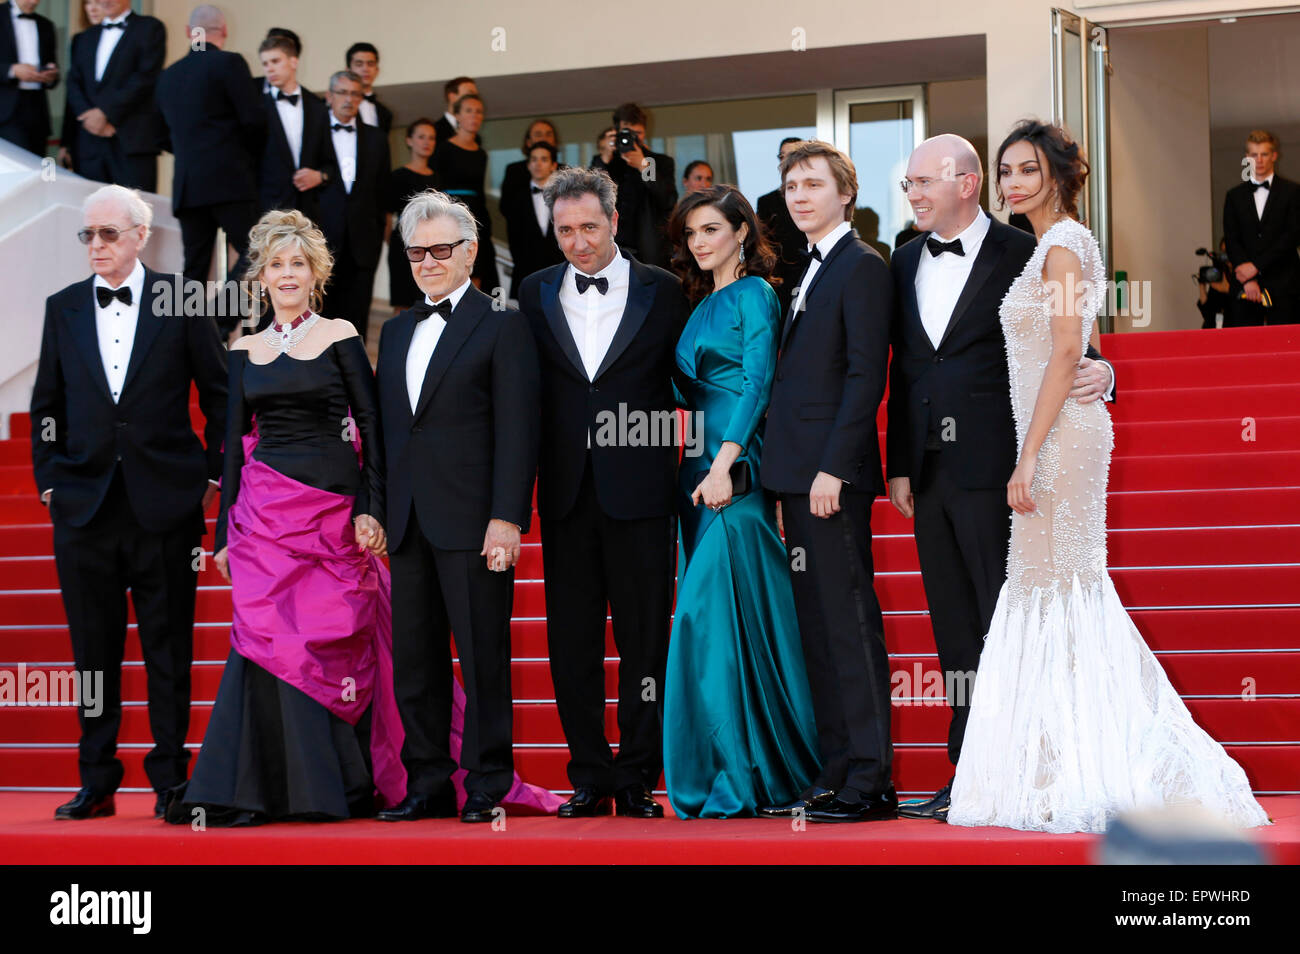 Michael Caine, Jane Fonda, Harvey Keitel, Paolo Sorrentino, Rachel Weisz, Paul Dano, Alex Mcqueen und Madalina Ghenea attending the 'Youth' premiere at the 68th Cannes Film Festival on May 20, 2015/picture alliance Stock Photo